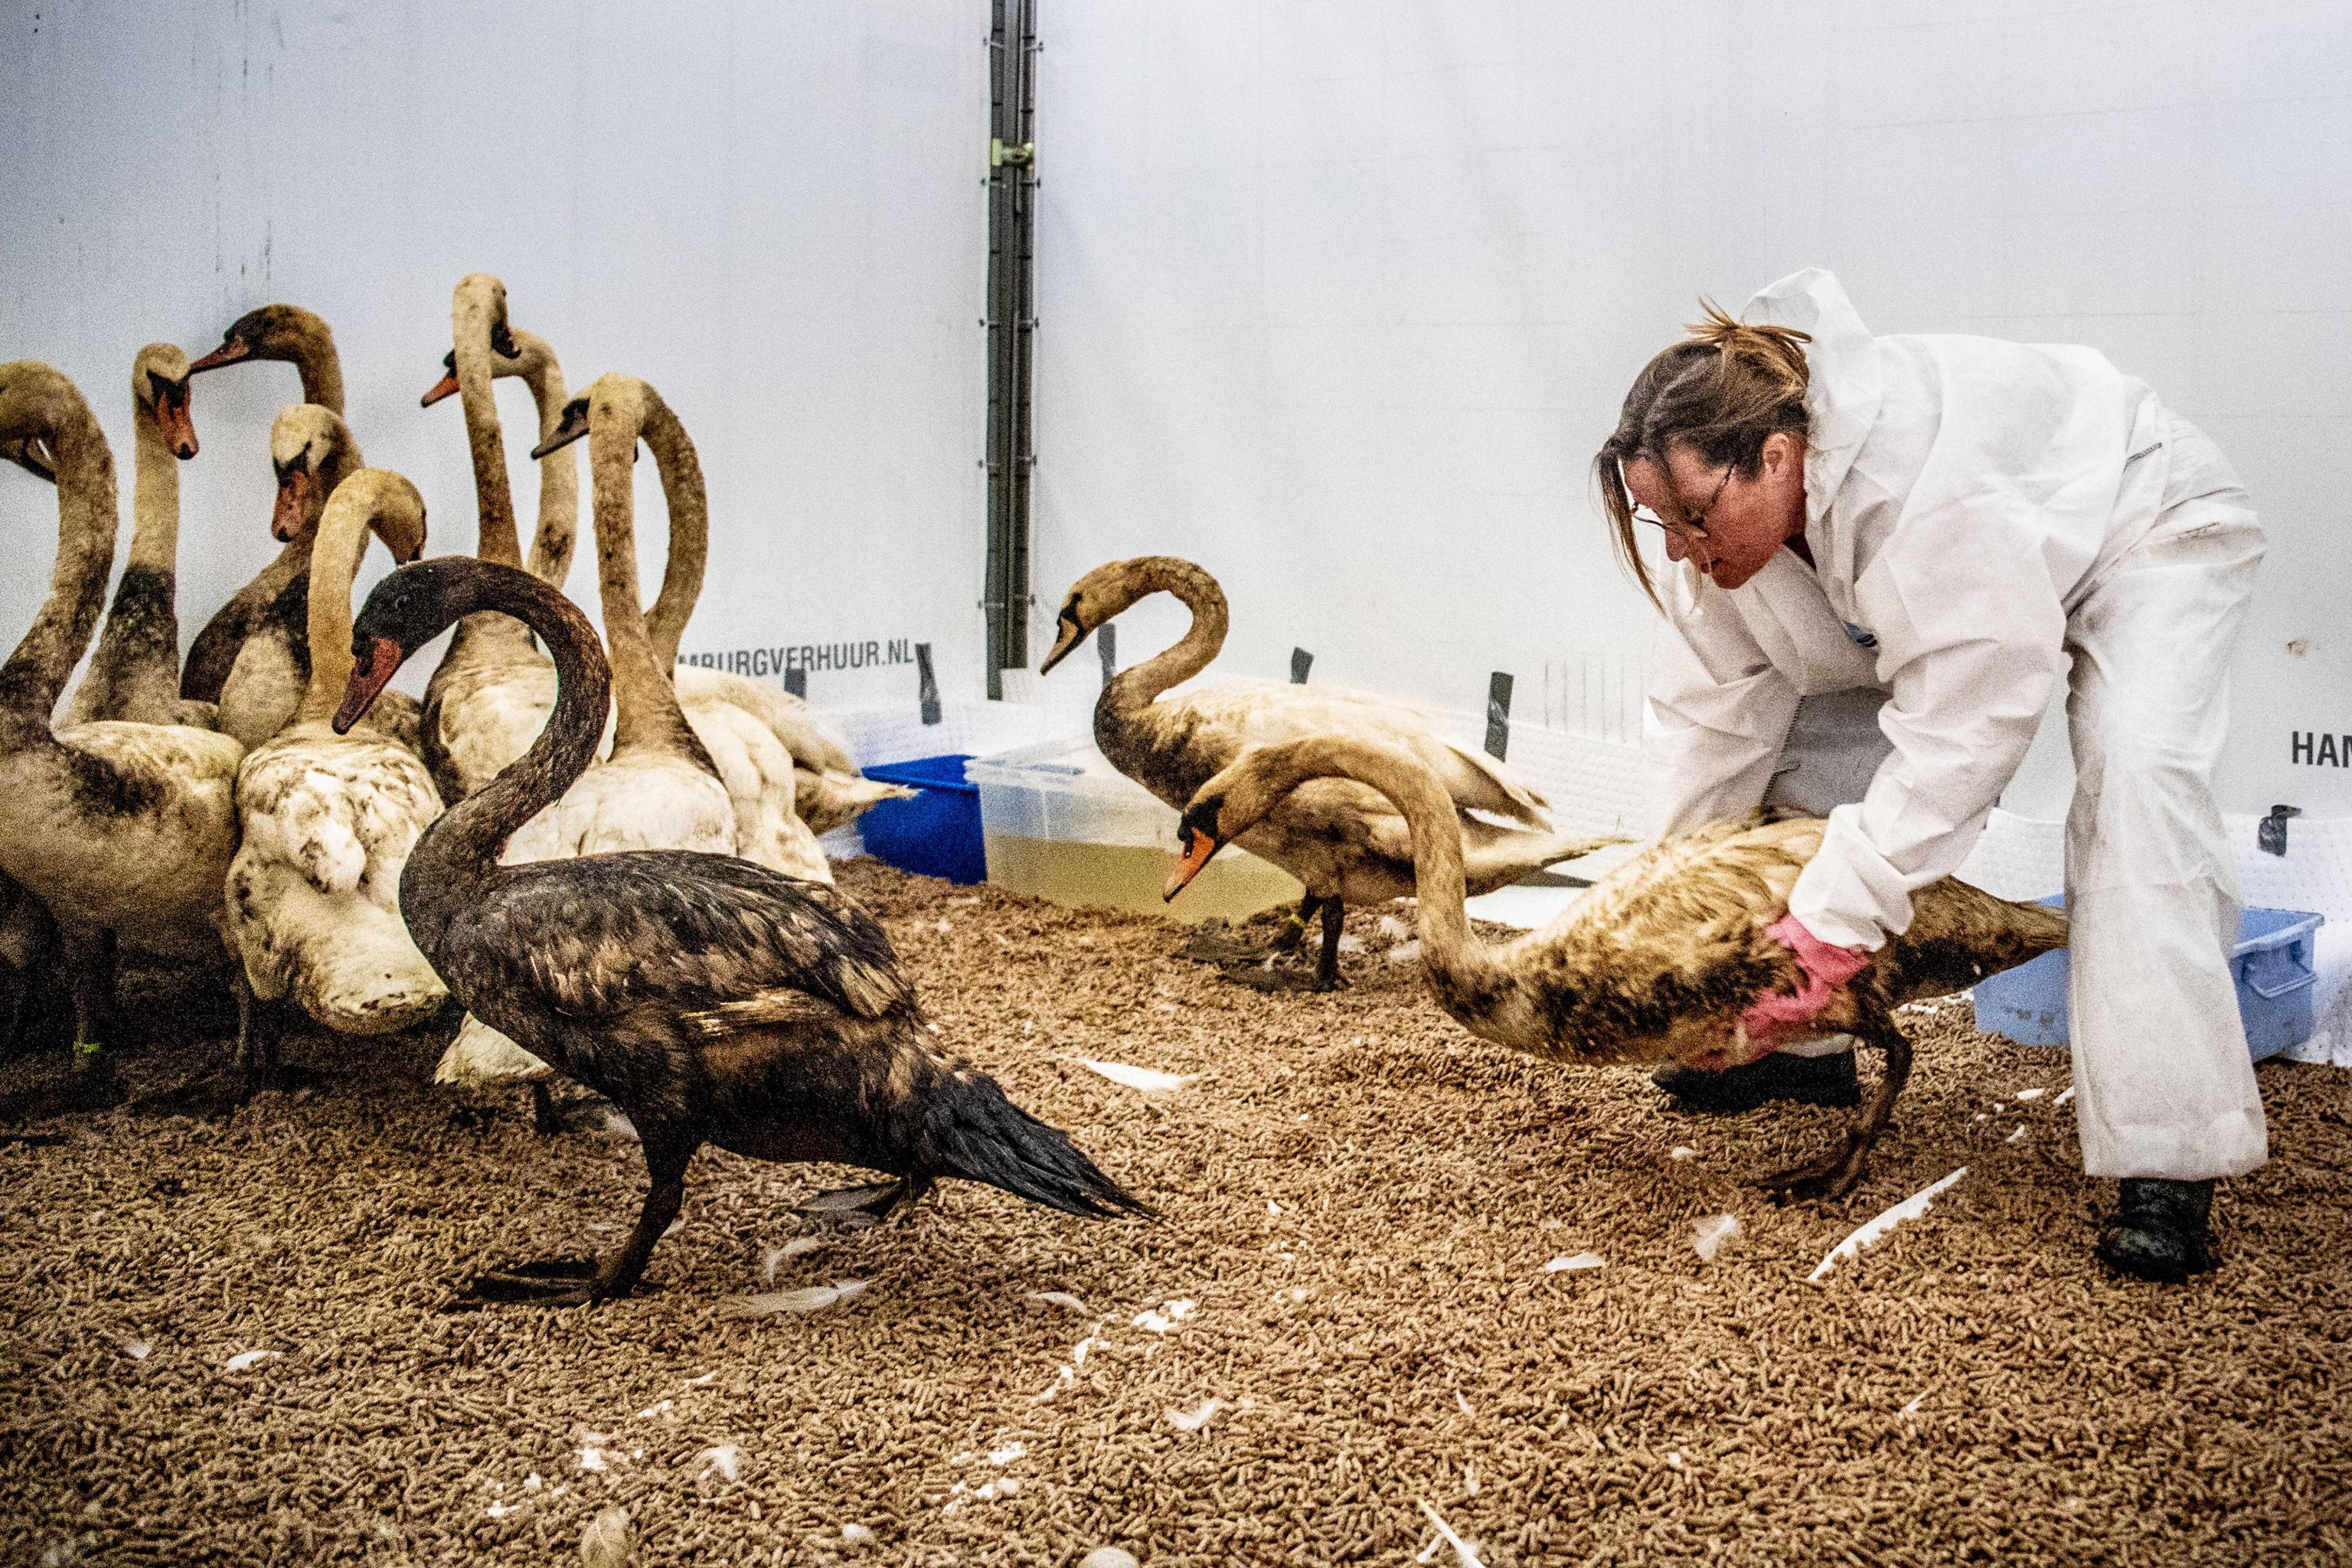 epa06842476 A shelter worker carries a swan covered in oil at a bird shelter near Hoek van Holland, The Netherlands, 26 June 2018. The swans were covered with oil after a tanker crashed into a jetty in the port of Rotterdam and spilled around 200 tons of oil into the water. EPA/ROBIN UTRECHT